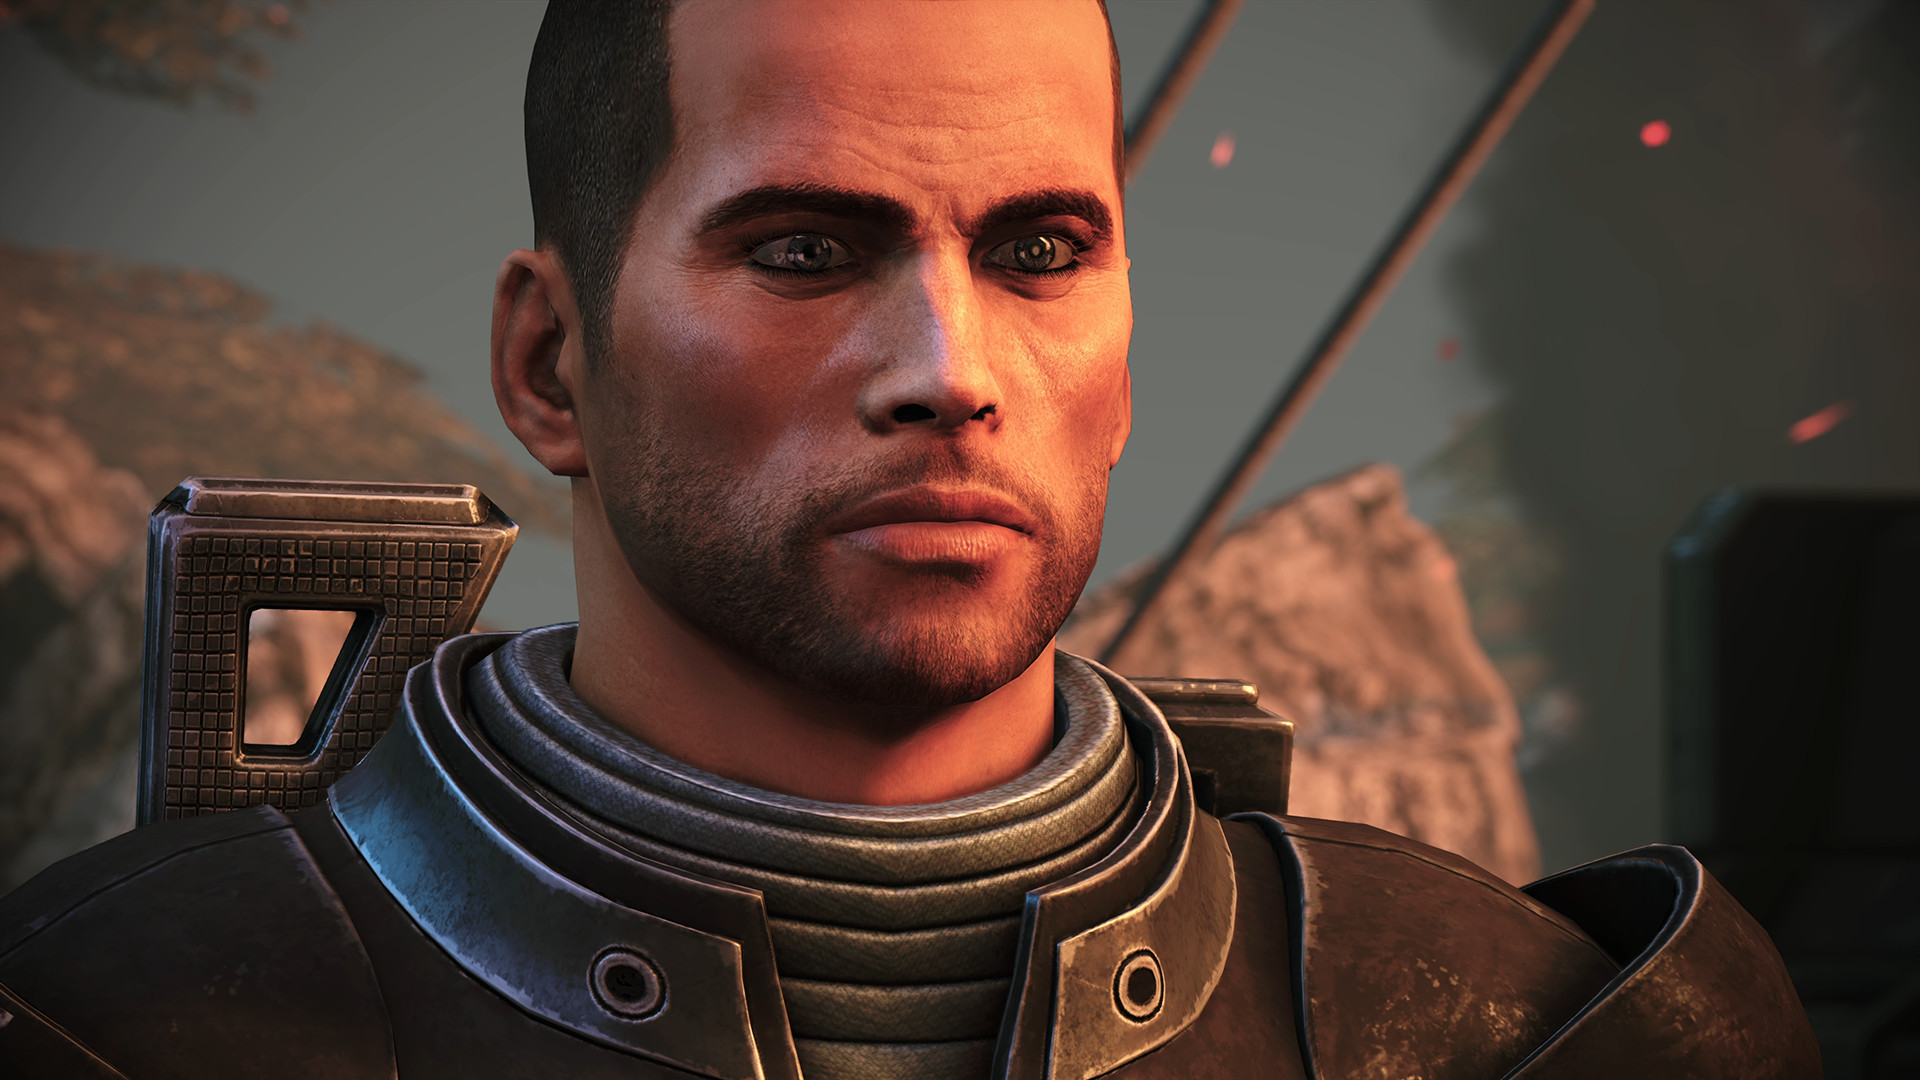 Amazon could soon begin work on the Mass Effect series